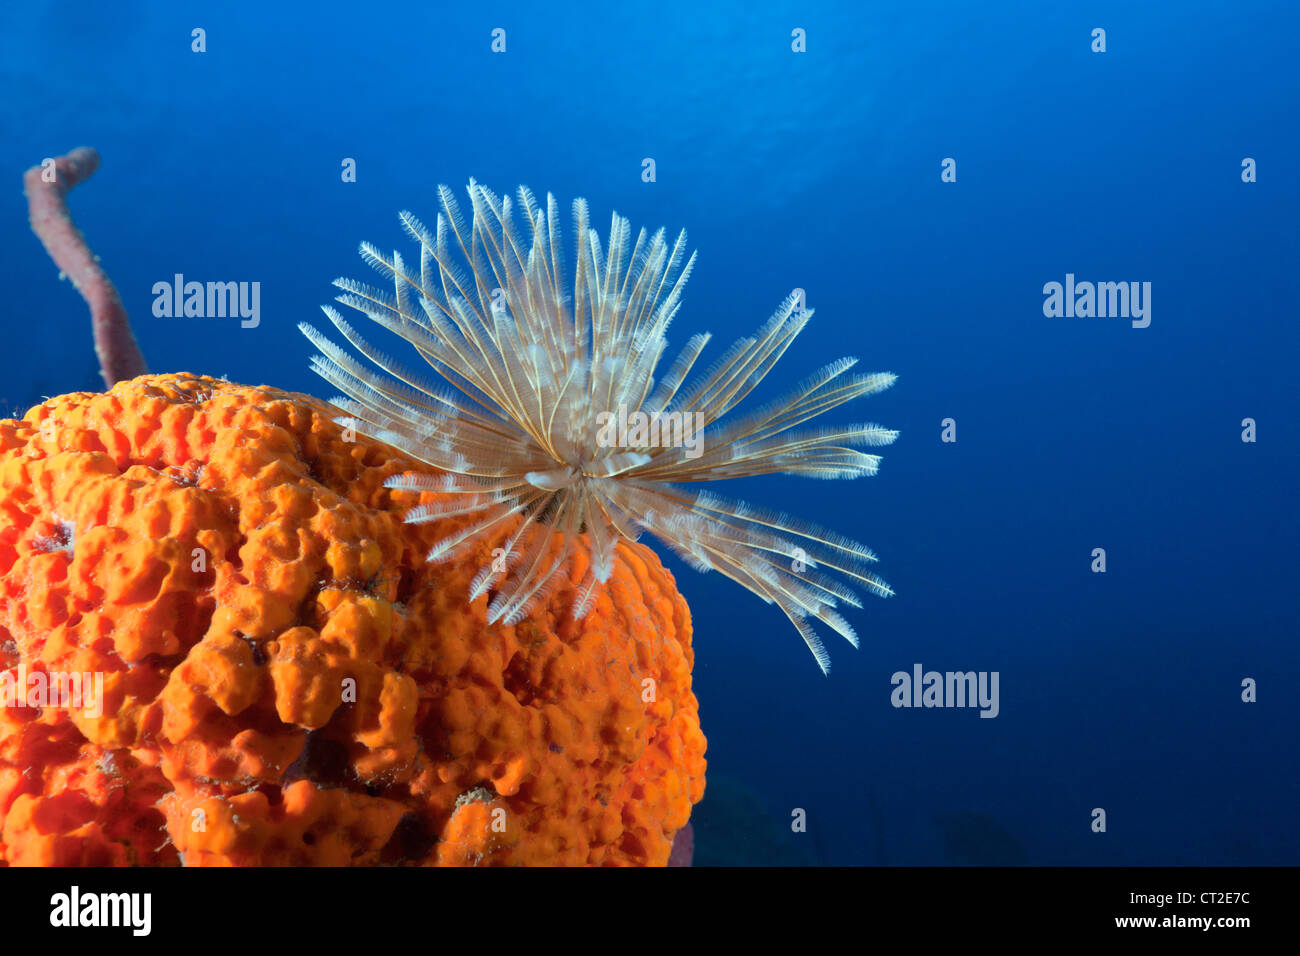 Fan Worm on red Sponge, Spirographis sp., Caribbean Sea, Dominica Stock Photo